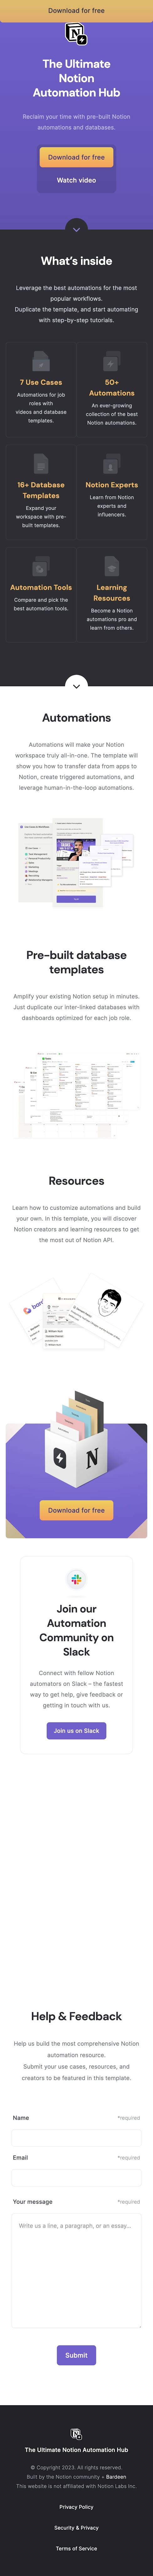 The Notion Automation Hub landing page design